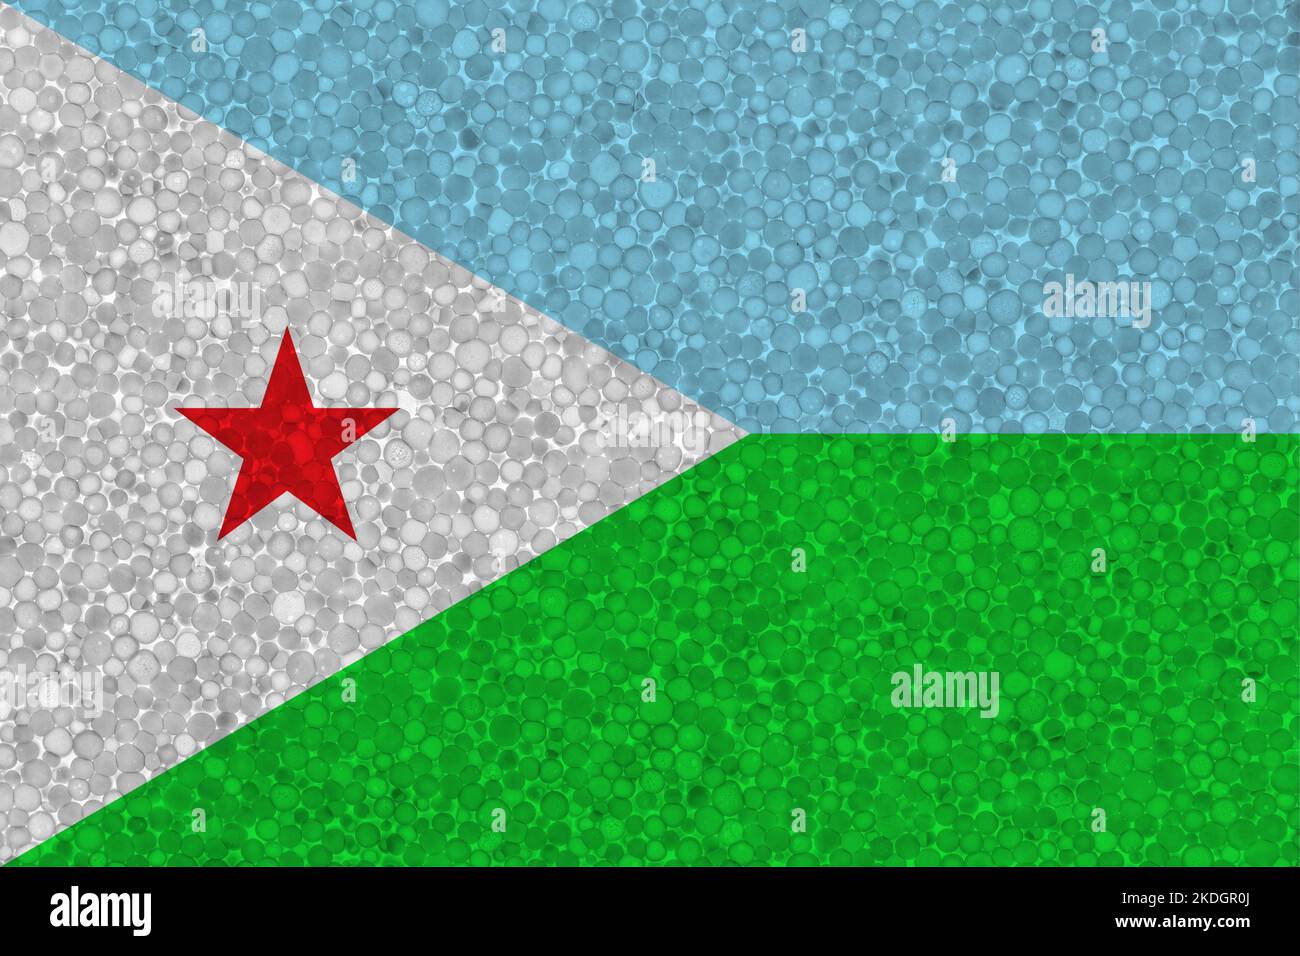 Flag of Djibouti on styrofoam texture. national flag painted on the surface of plastic foam Stock Photo